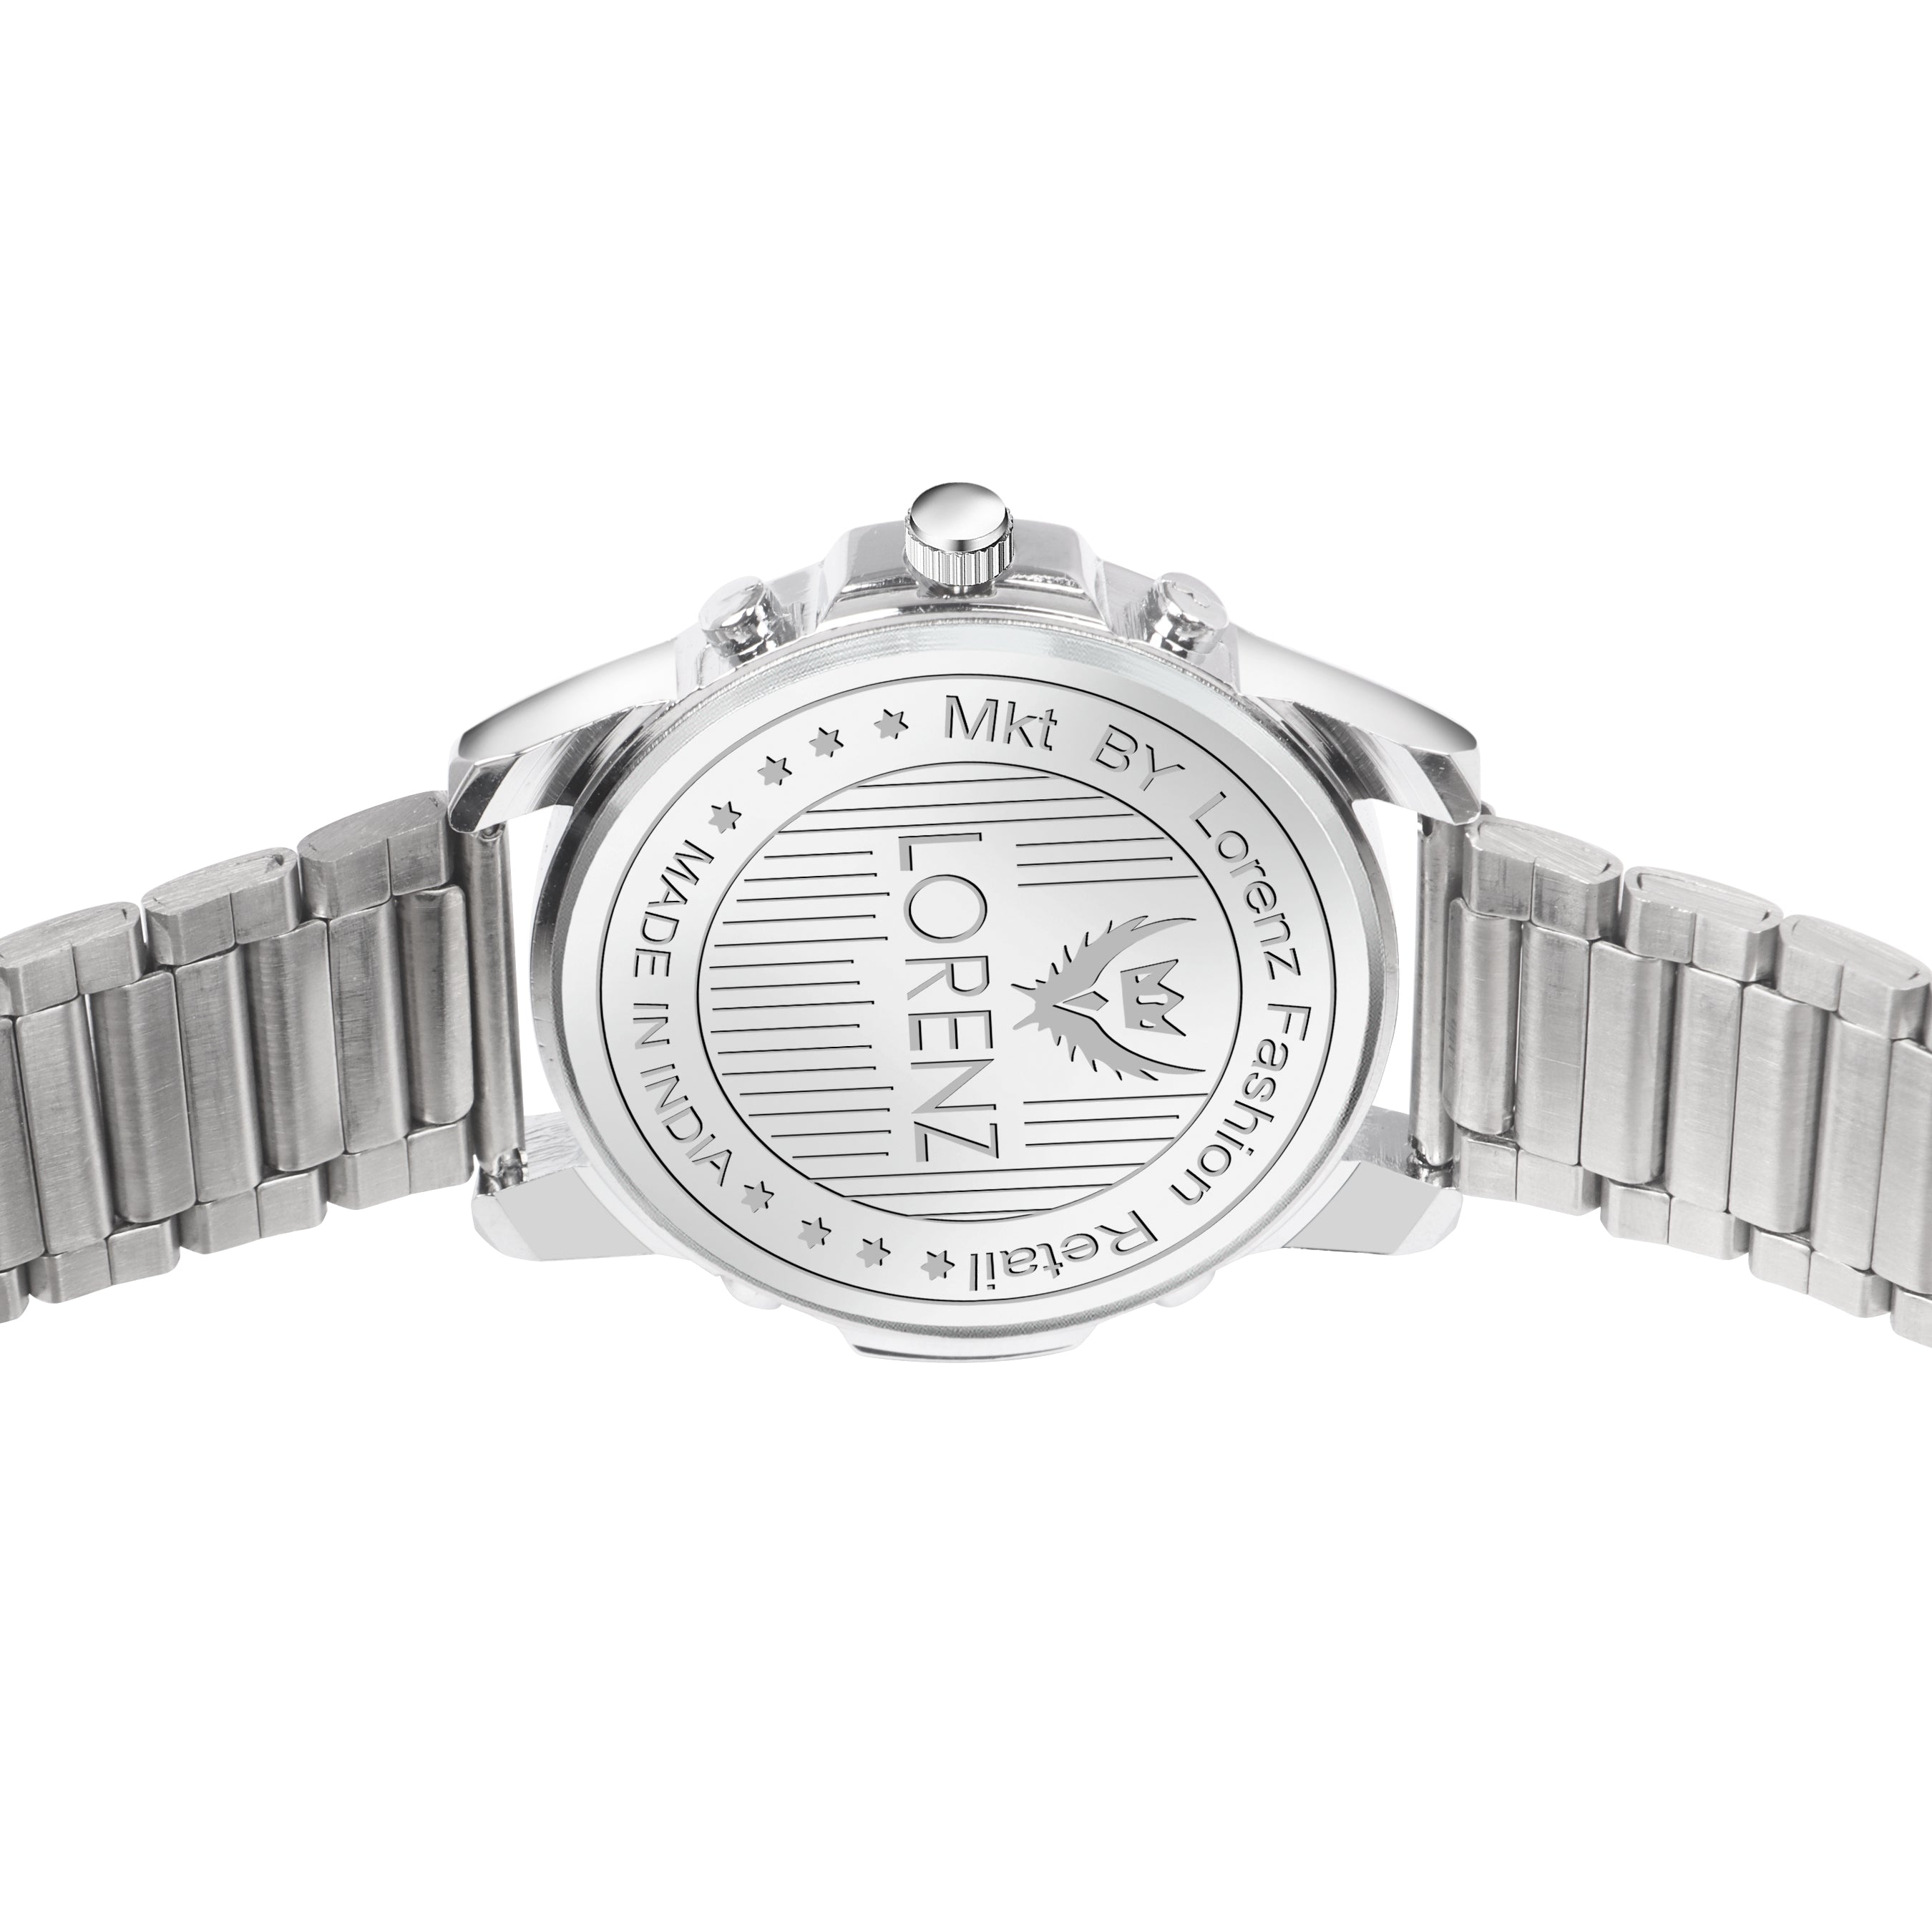 Make a Statement with Lorenz Stainless Steel Watch